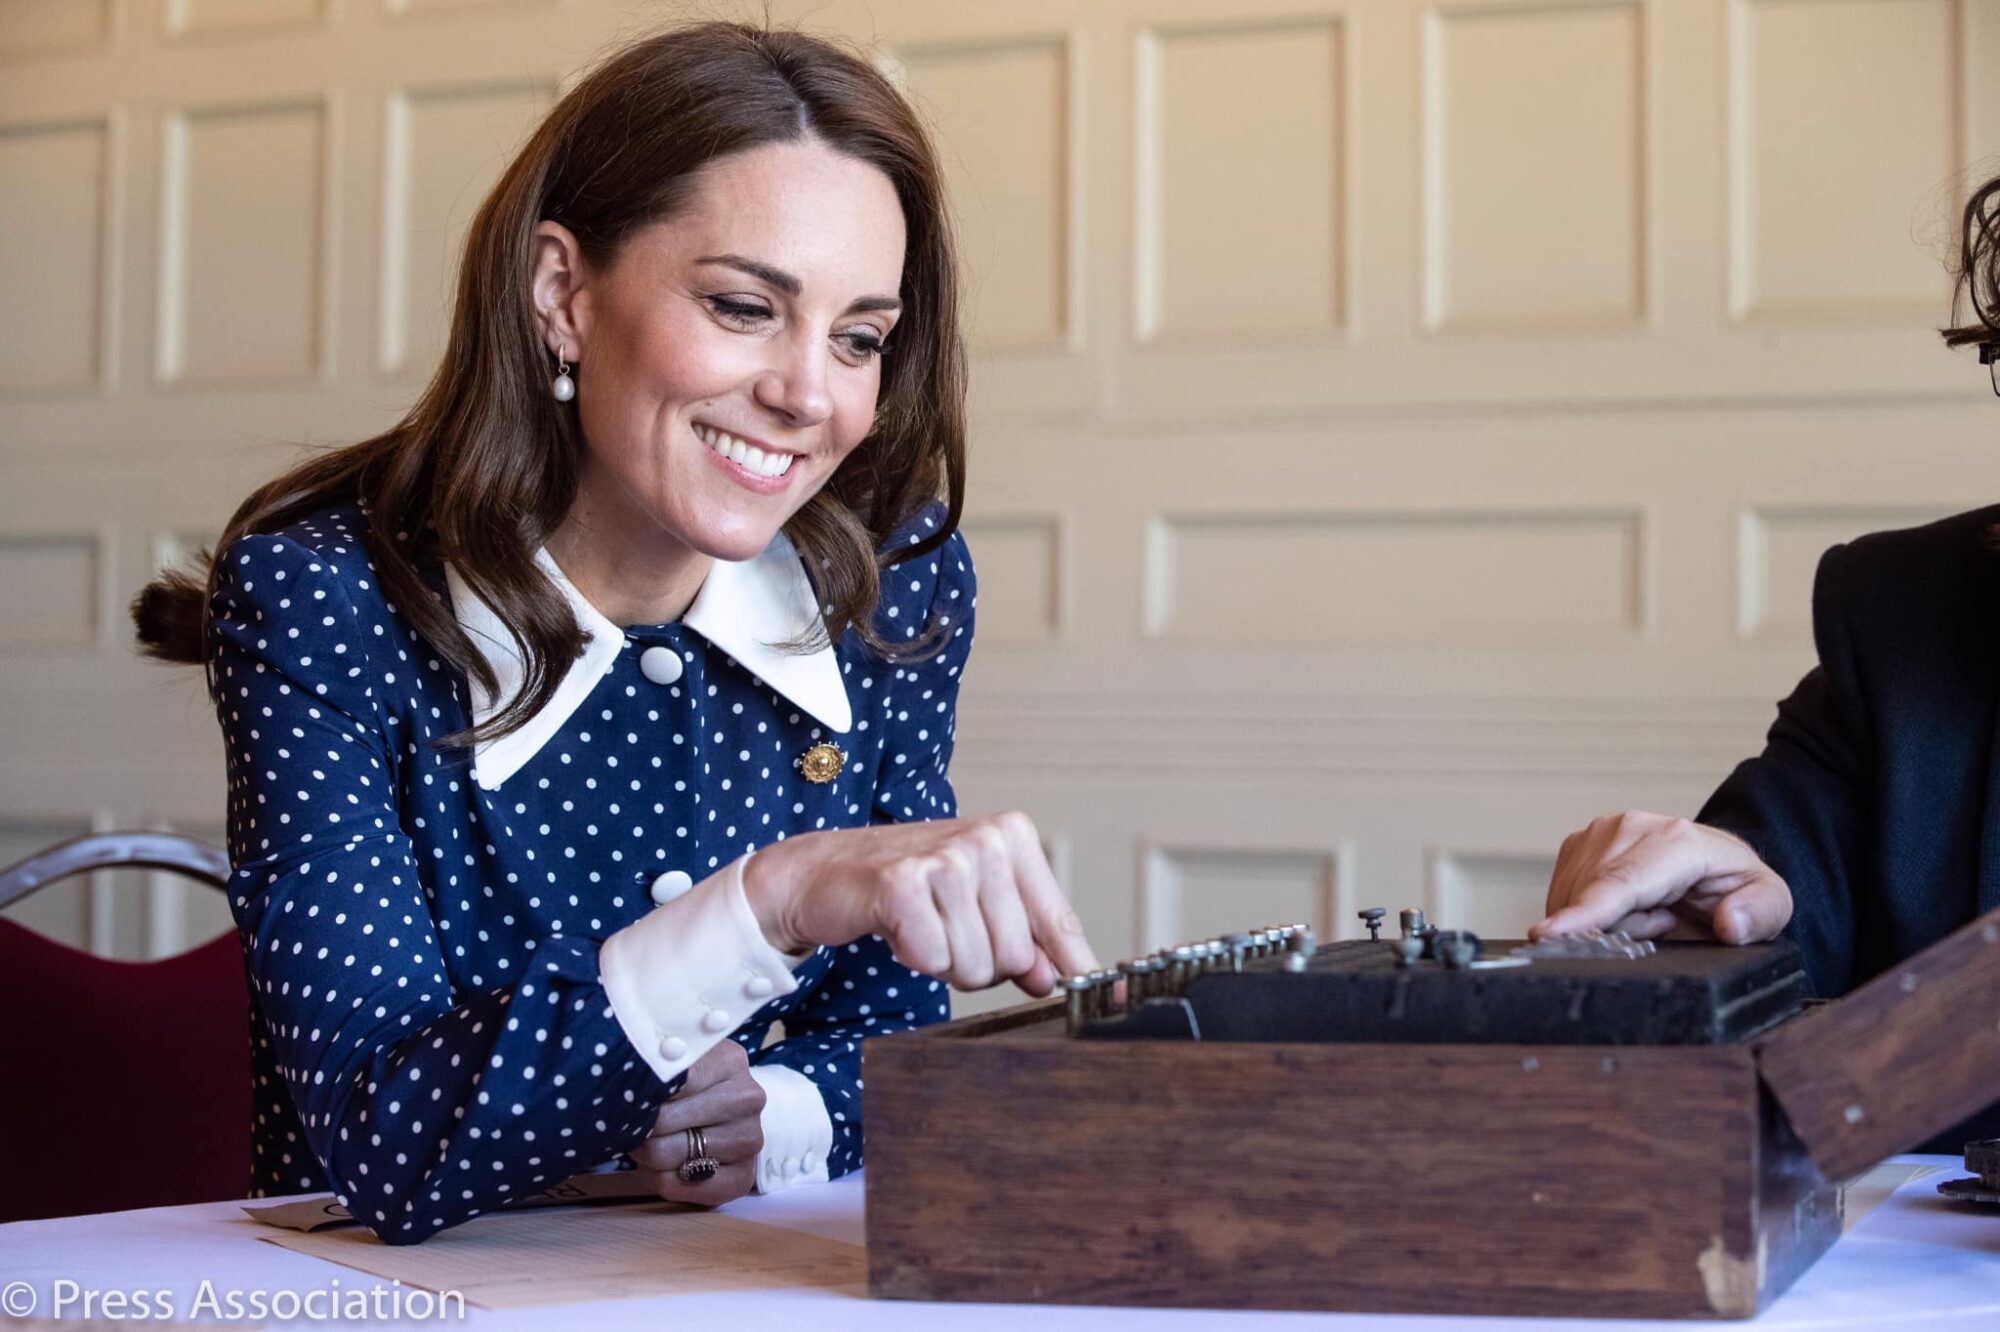 Kate Middleton Visits WWII Code-Breaking Center